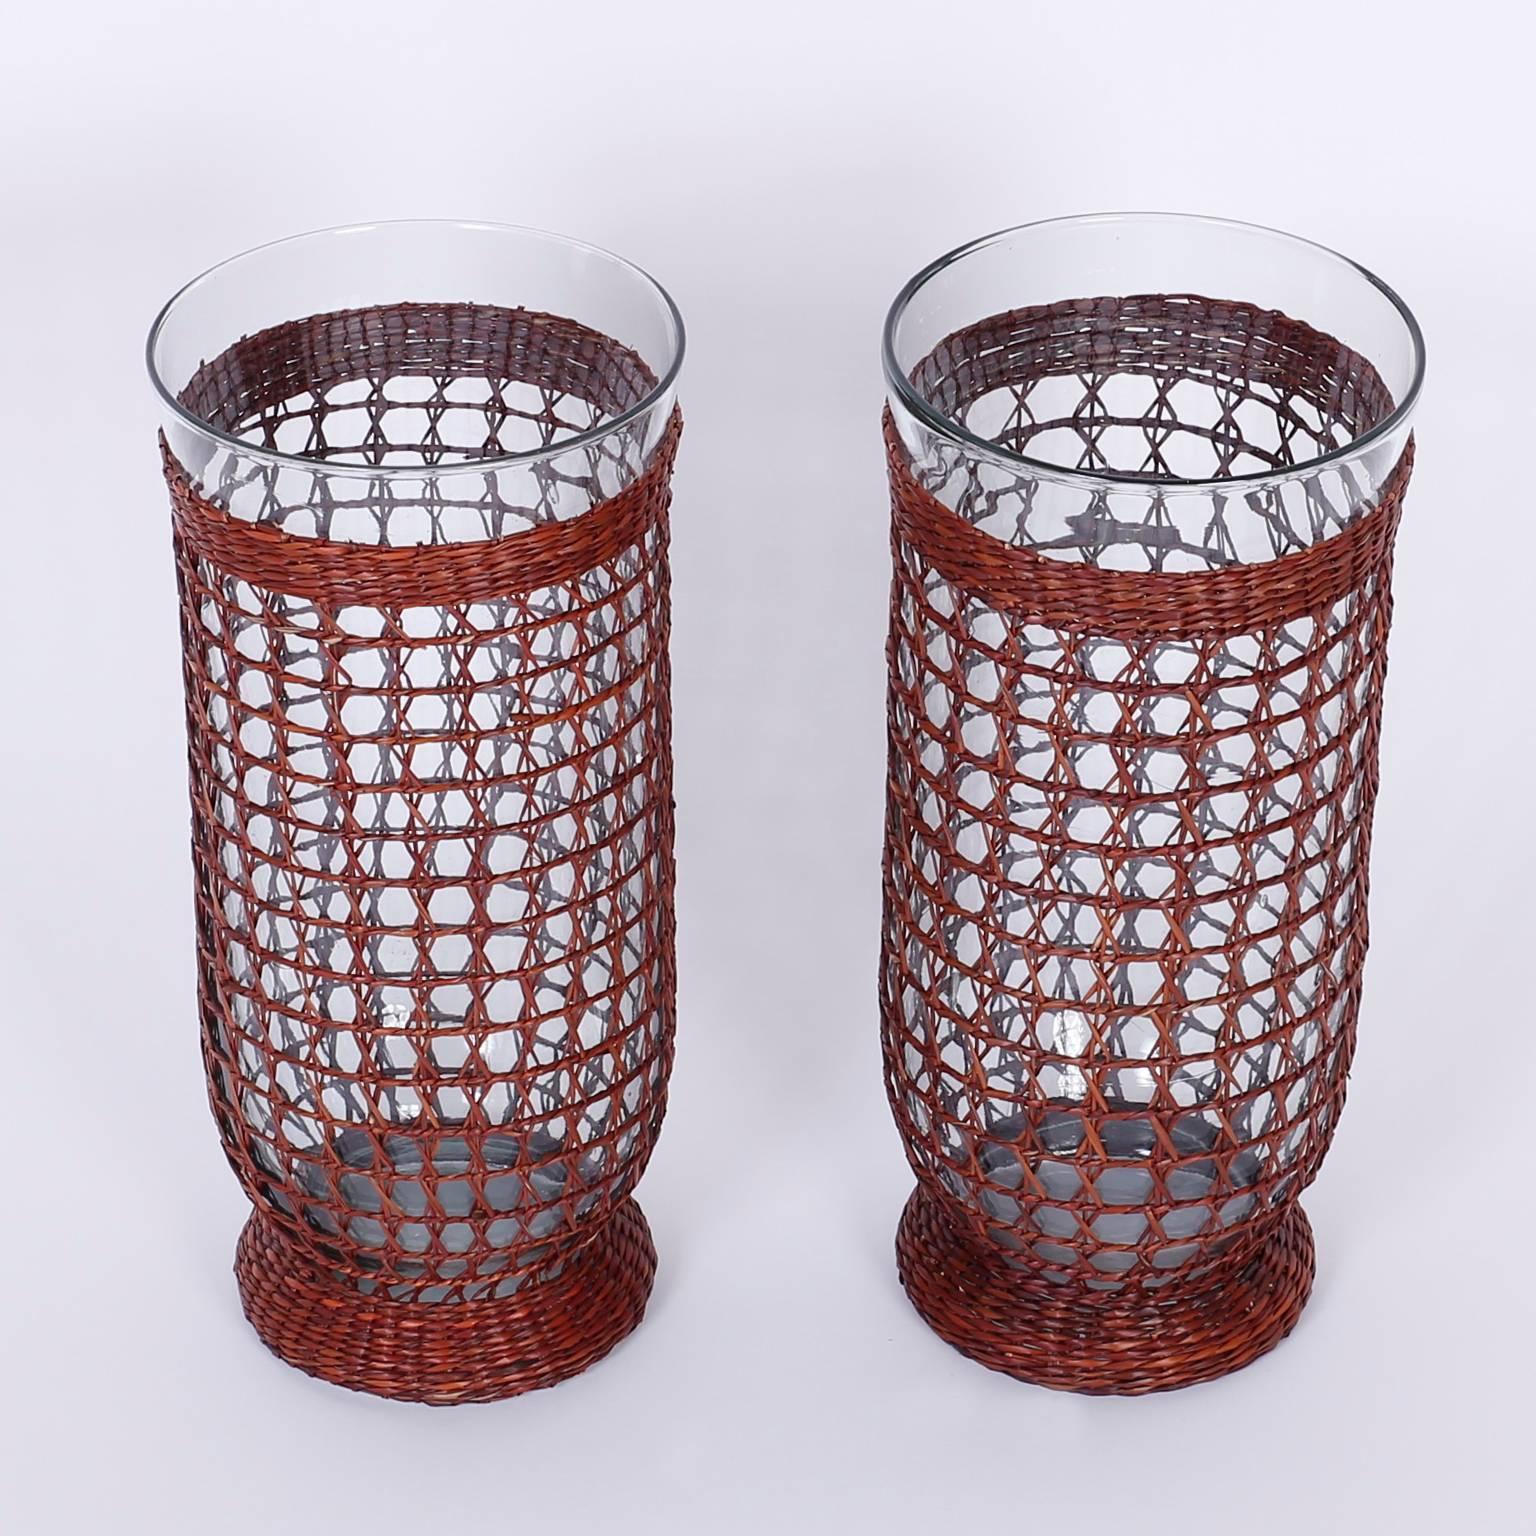 Chic pair of hurricane candleholders composed of Classic form handblown glass wrapped in fish net wicker or cane. Casual sophistication at its best.
 